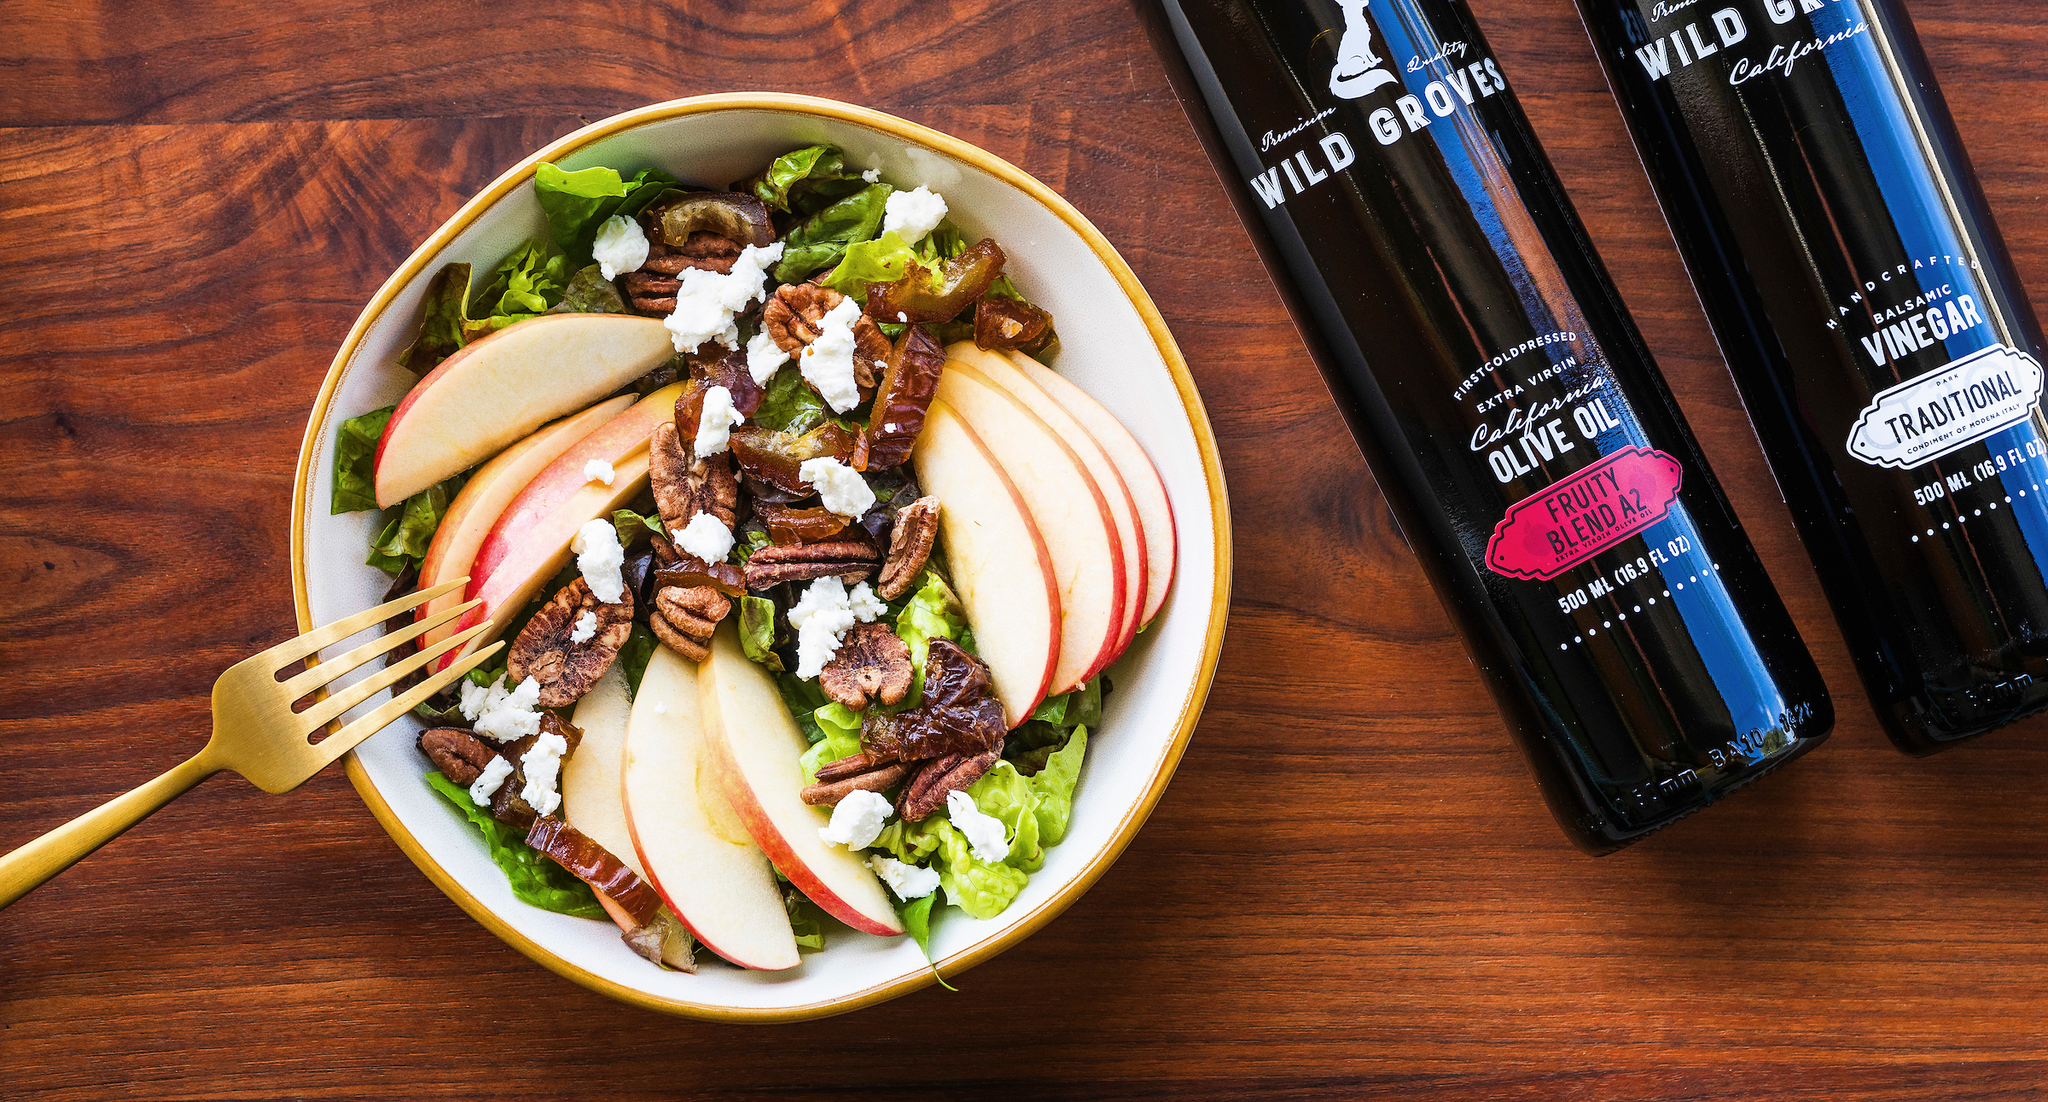 "How Do You Like Them Apples?" - A Gold Medal Winning Salad